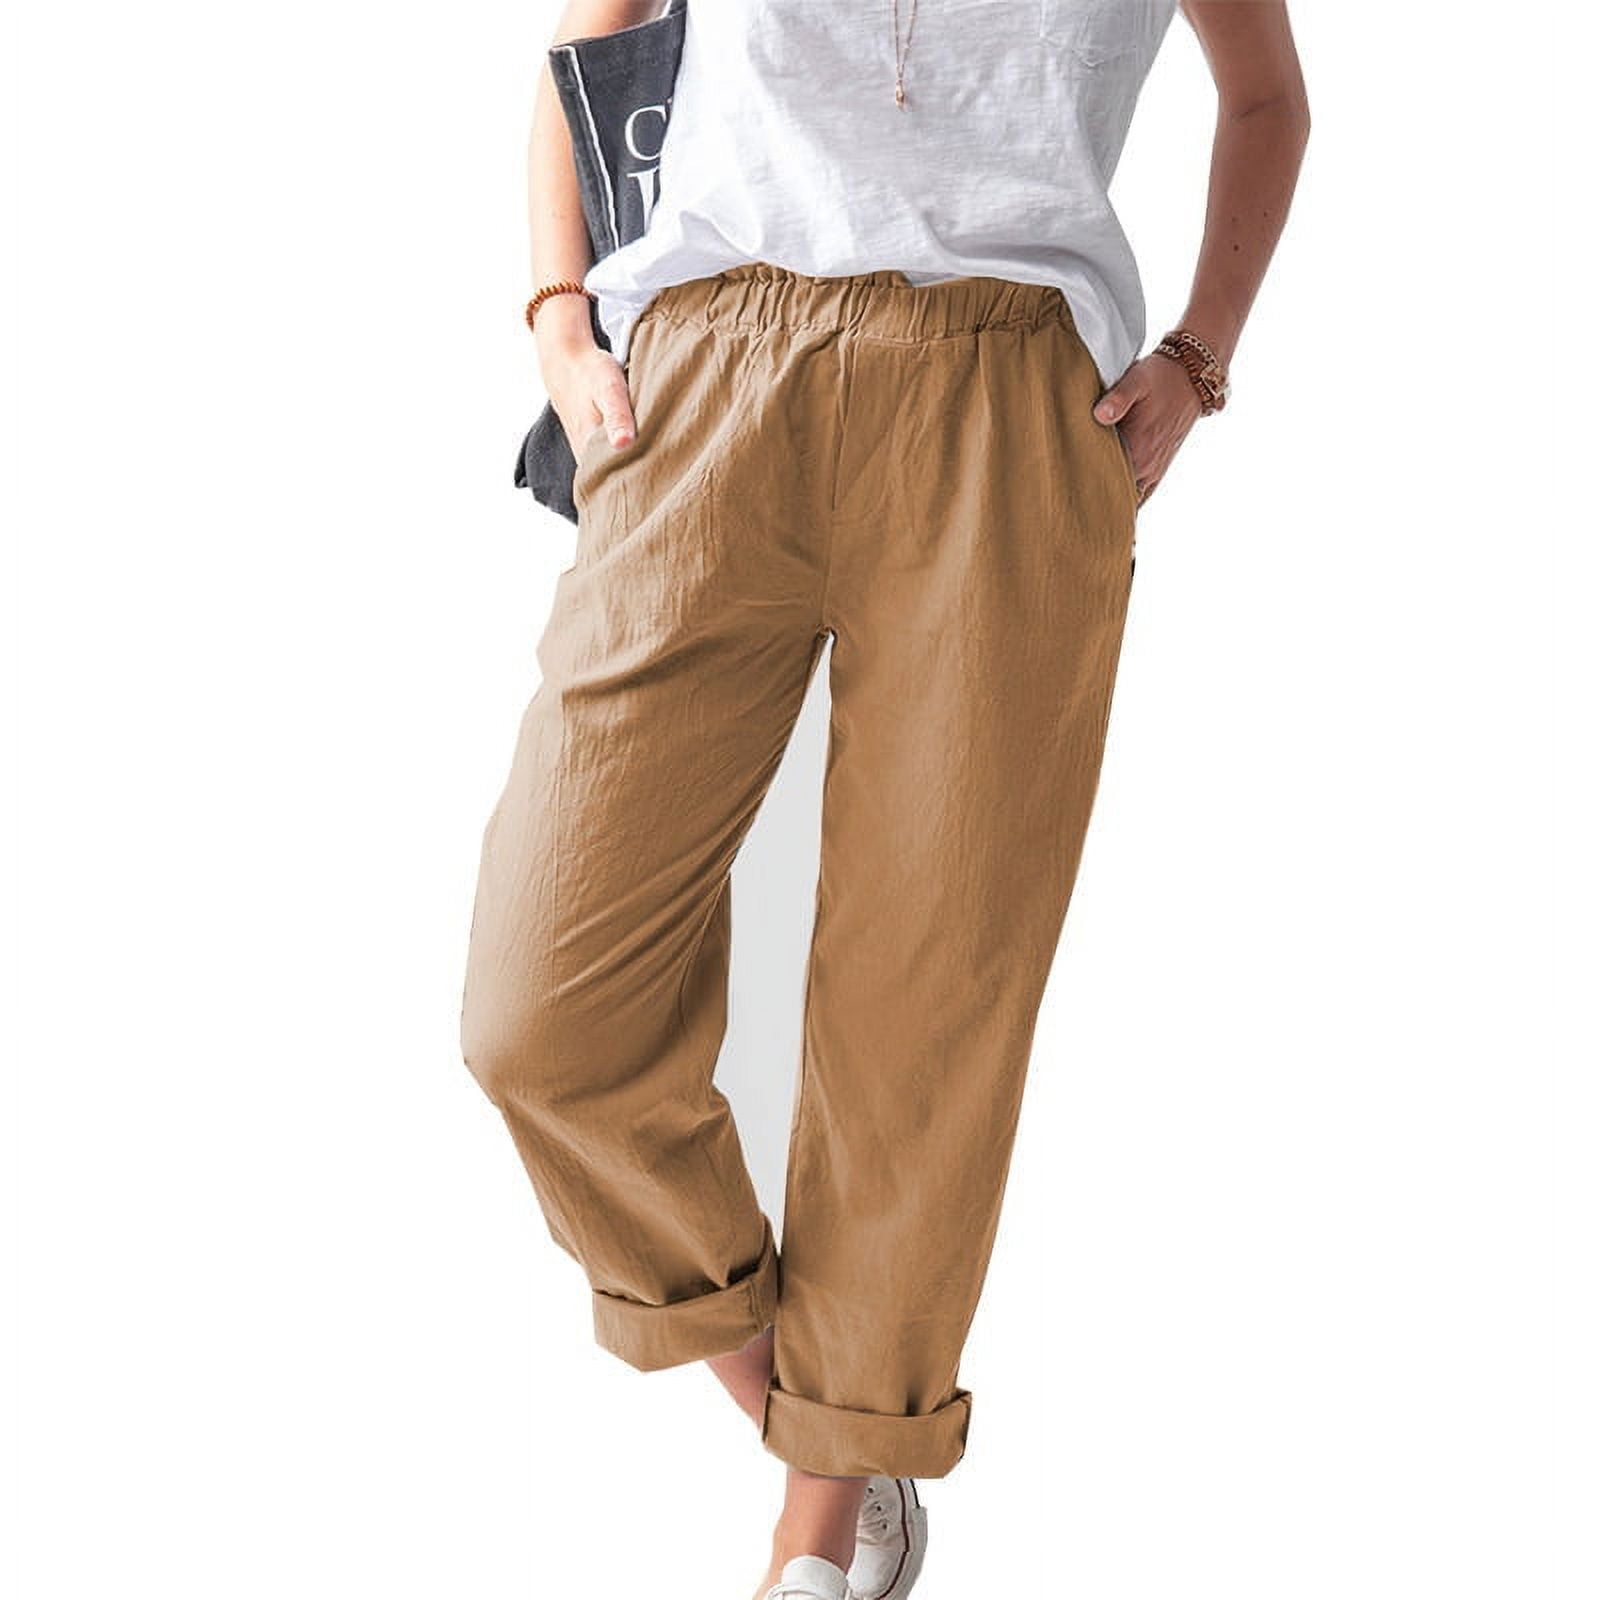 Women's High Waisted Casual Pants Cotton Linen Straight Pant Elastic ...